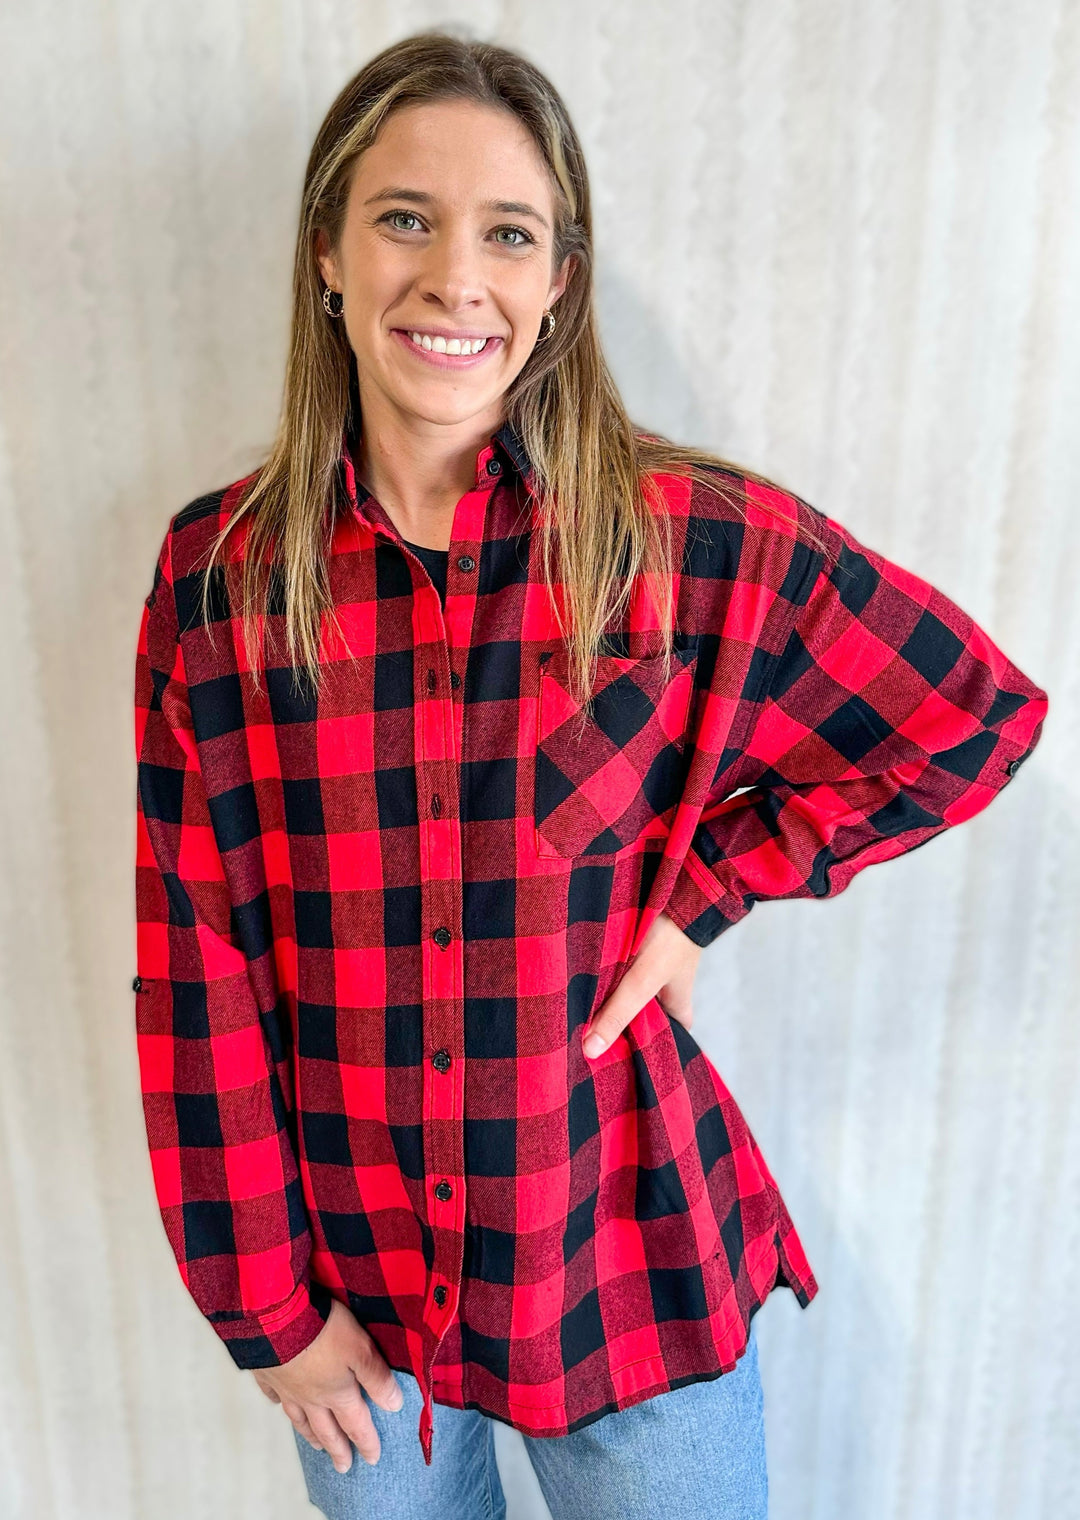 Oversize Red/Black Plaid Flannel Shirt \ Women's red and black buffalo check top